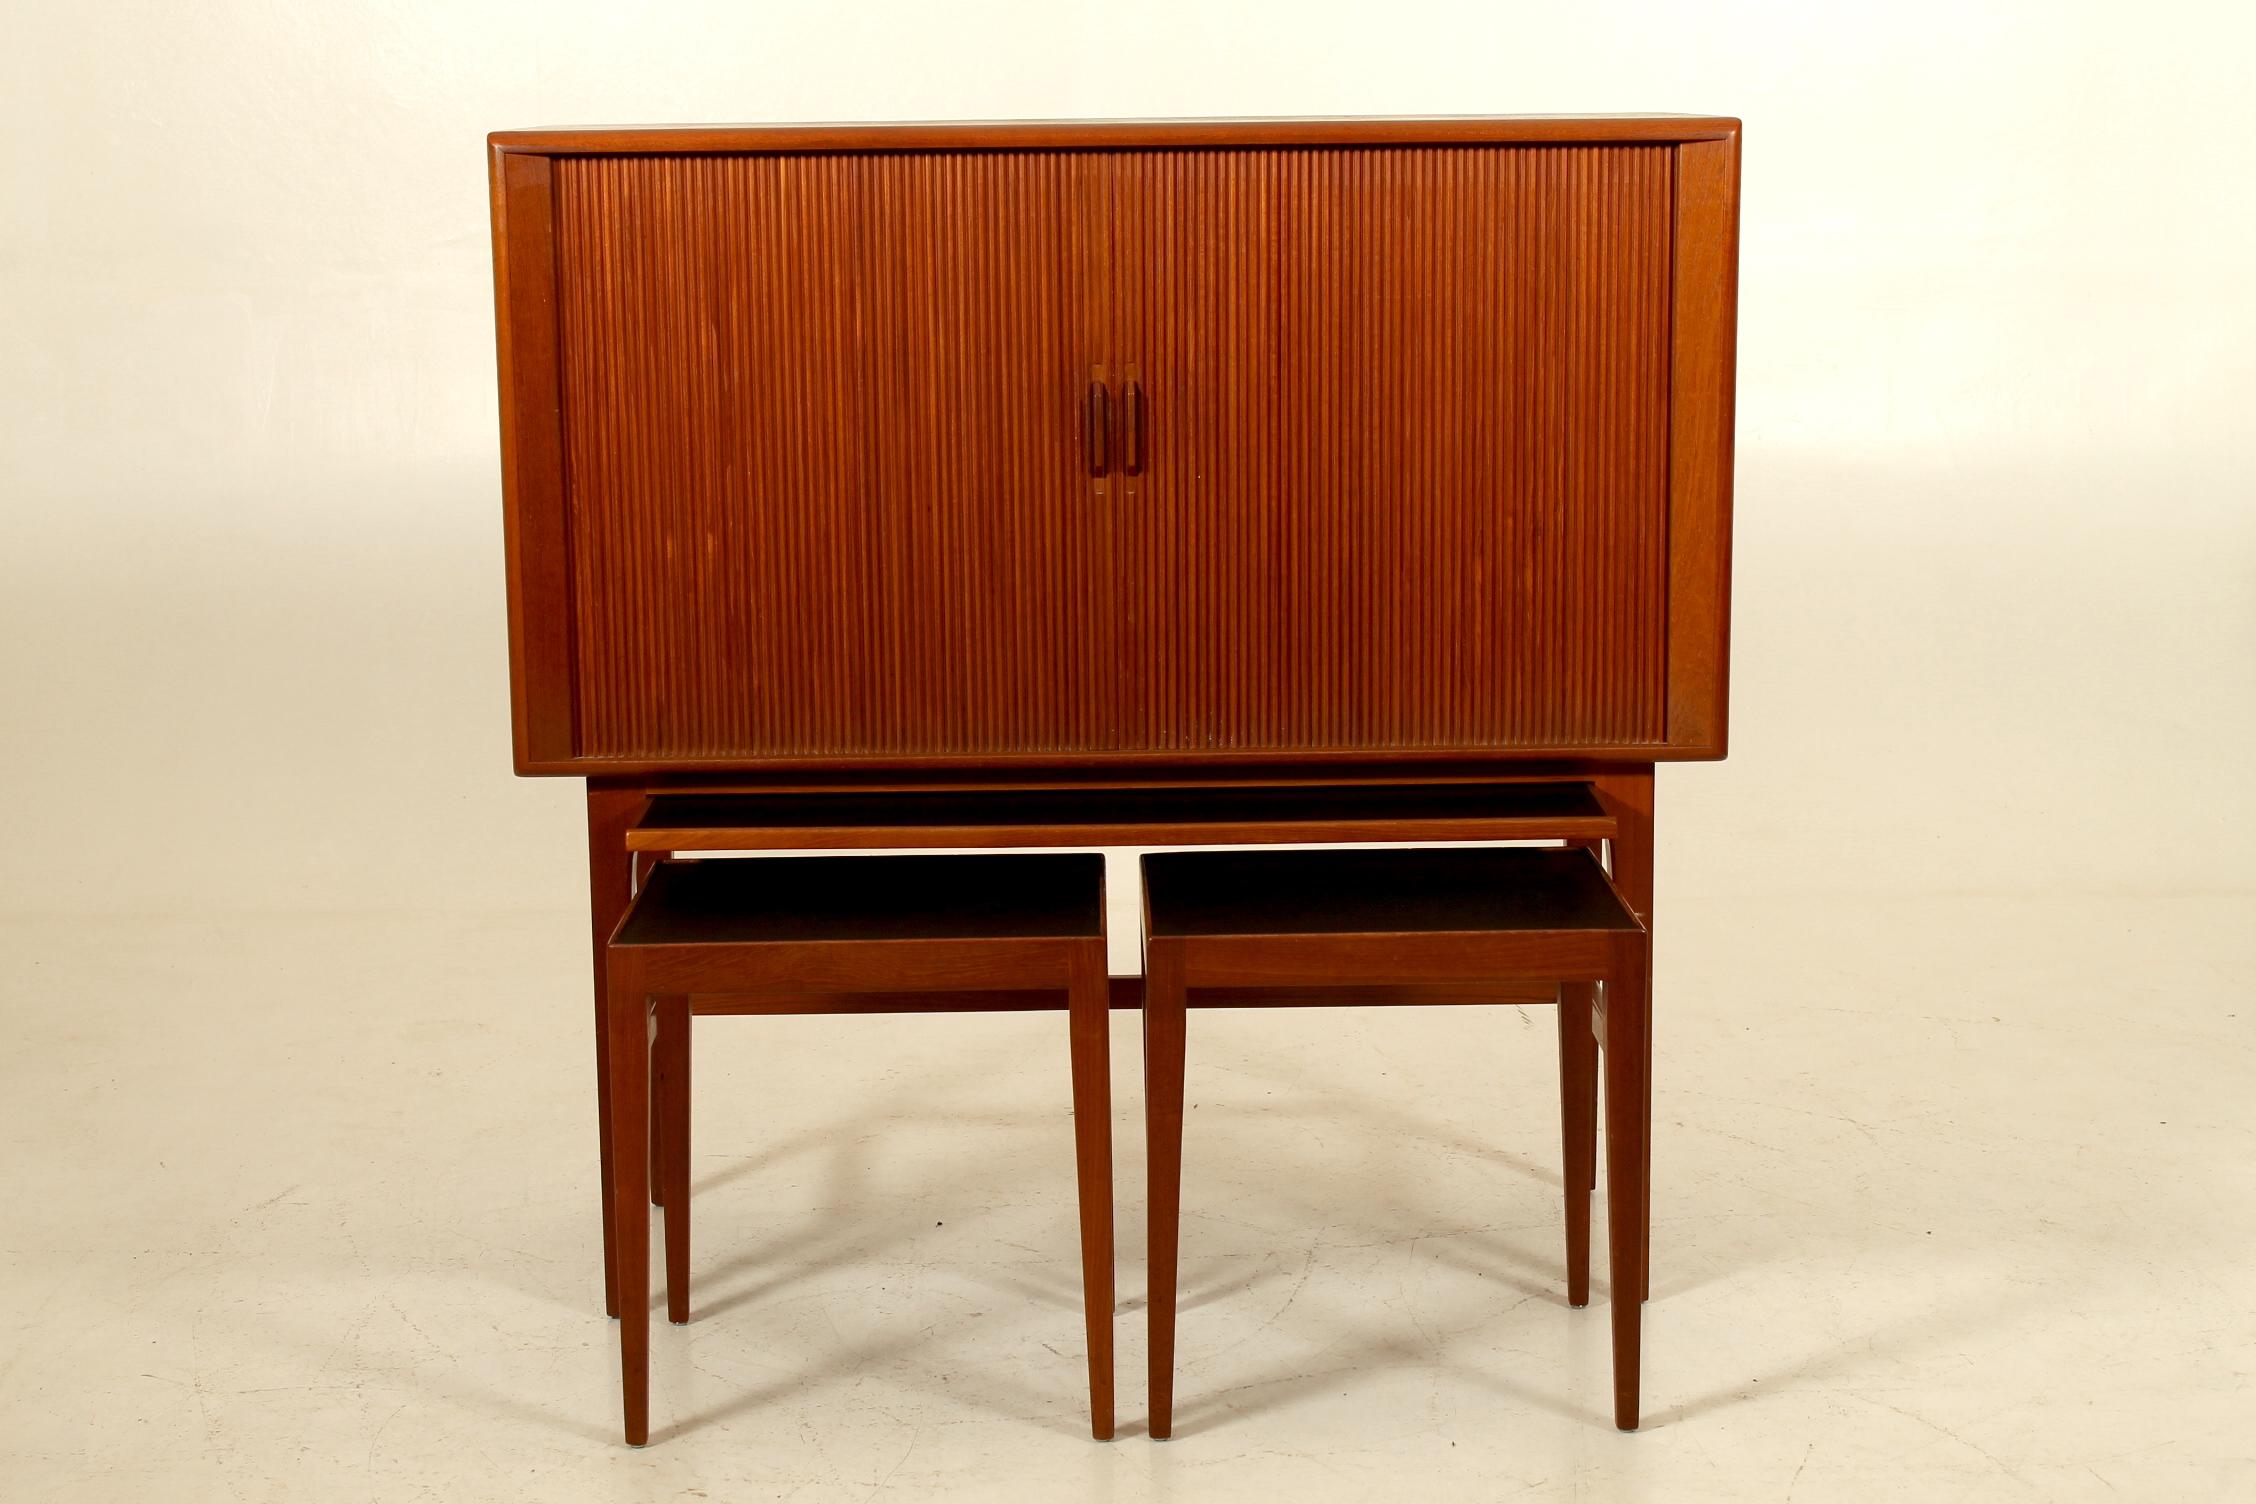 Outstanding and original teak Tambour door Drinks Cabinet / Dry Bar by KP Møbler. Designed and produced in the mid and late 1950s. Two small side tables below with black formica top and an additional pull out tray with black formica. Depth when